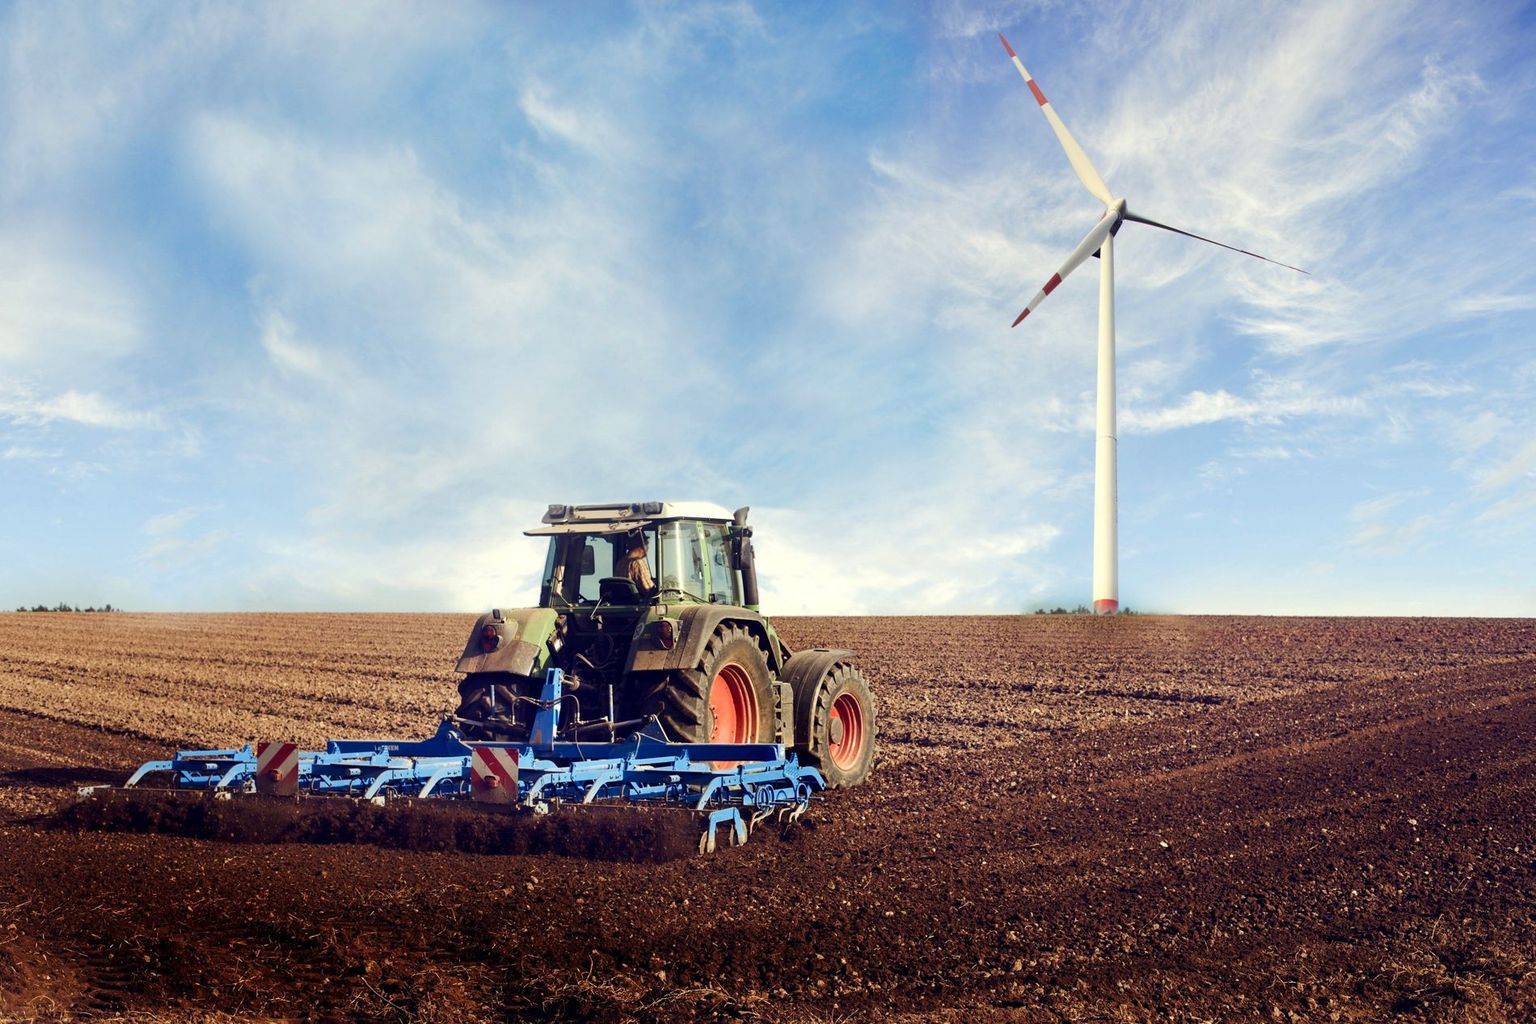 Agriculture and wind power